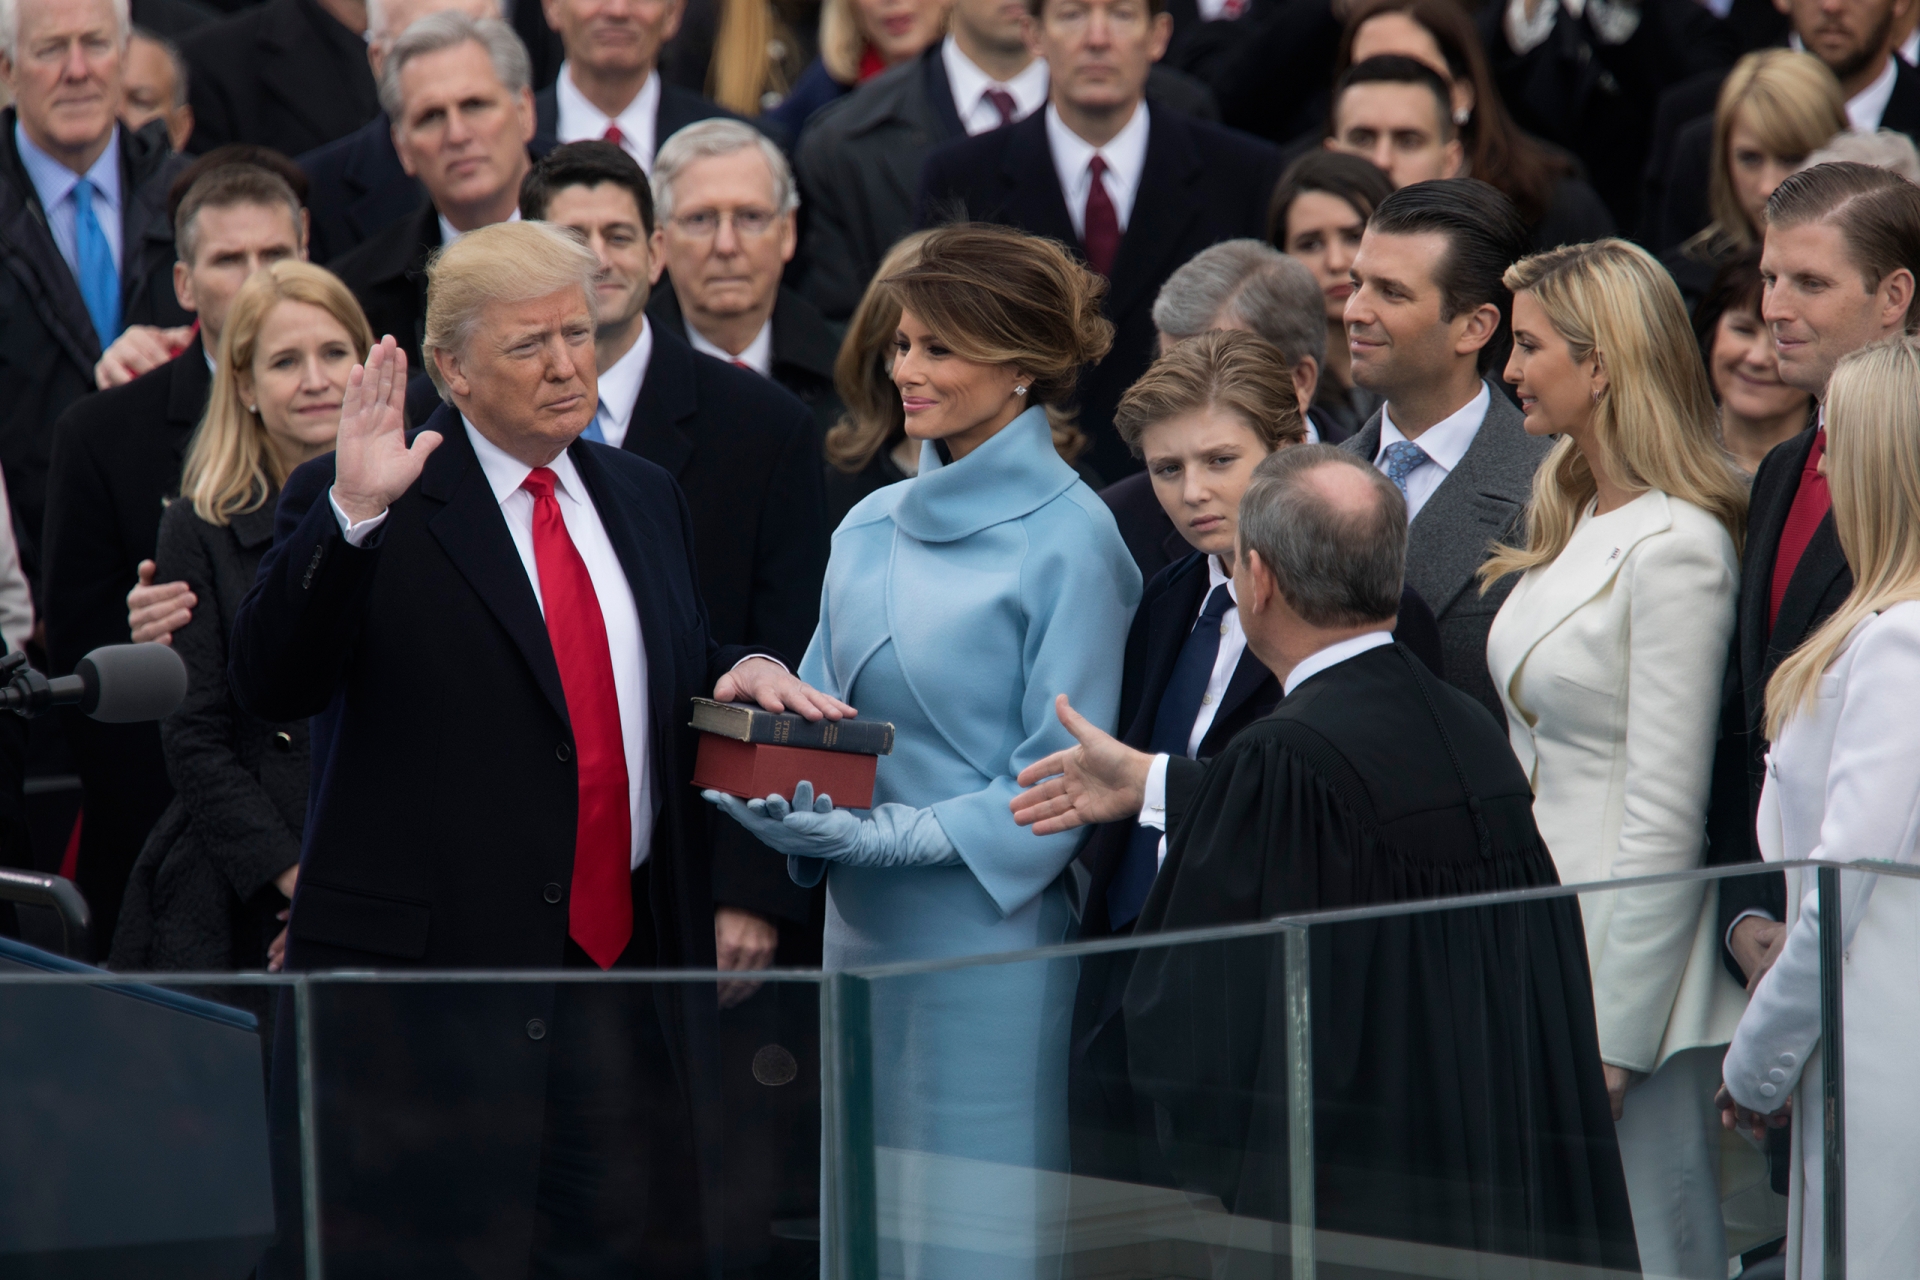 When is Inauguration Day of the President of the United States in 2021?